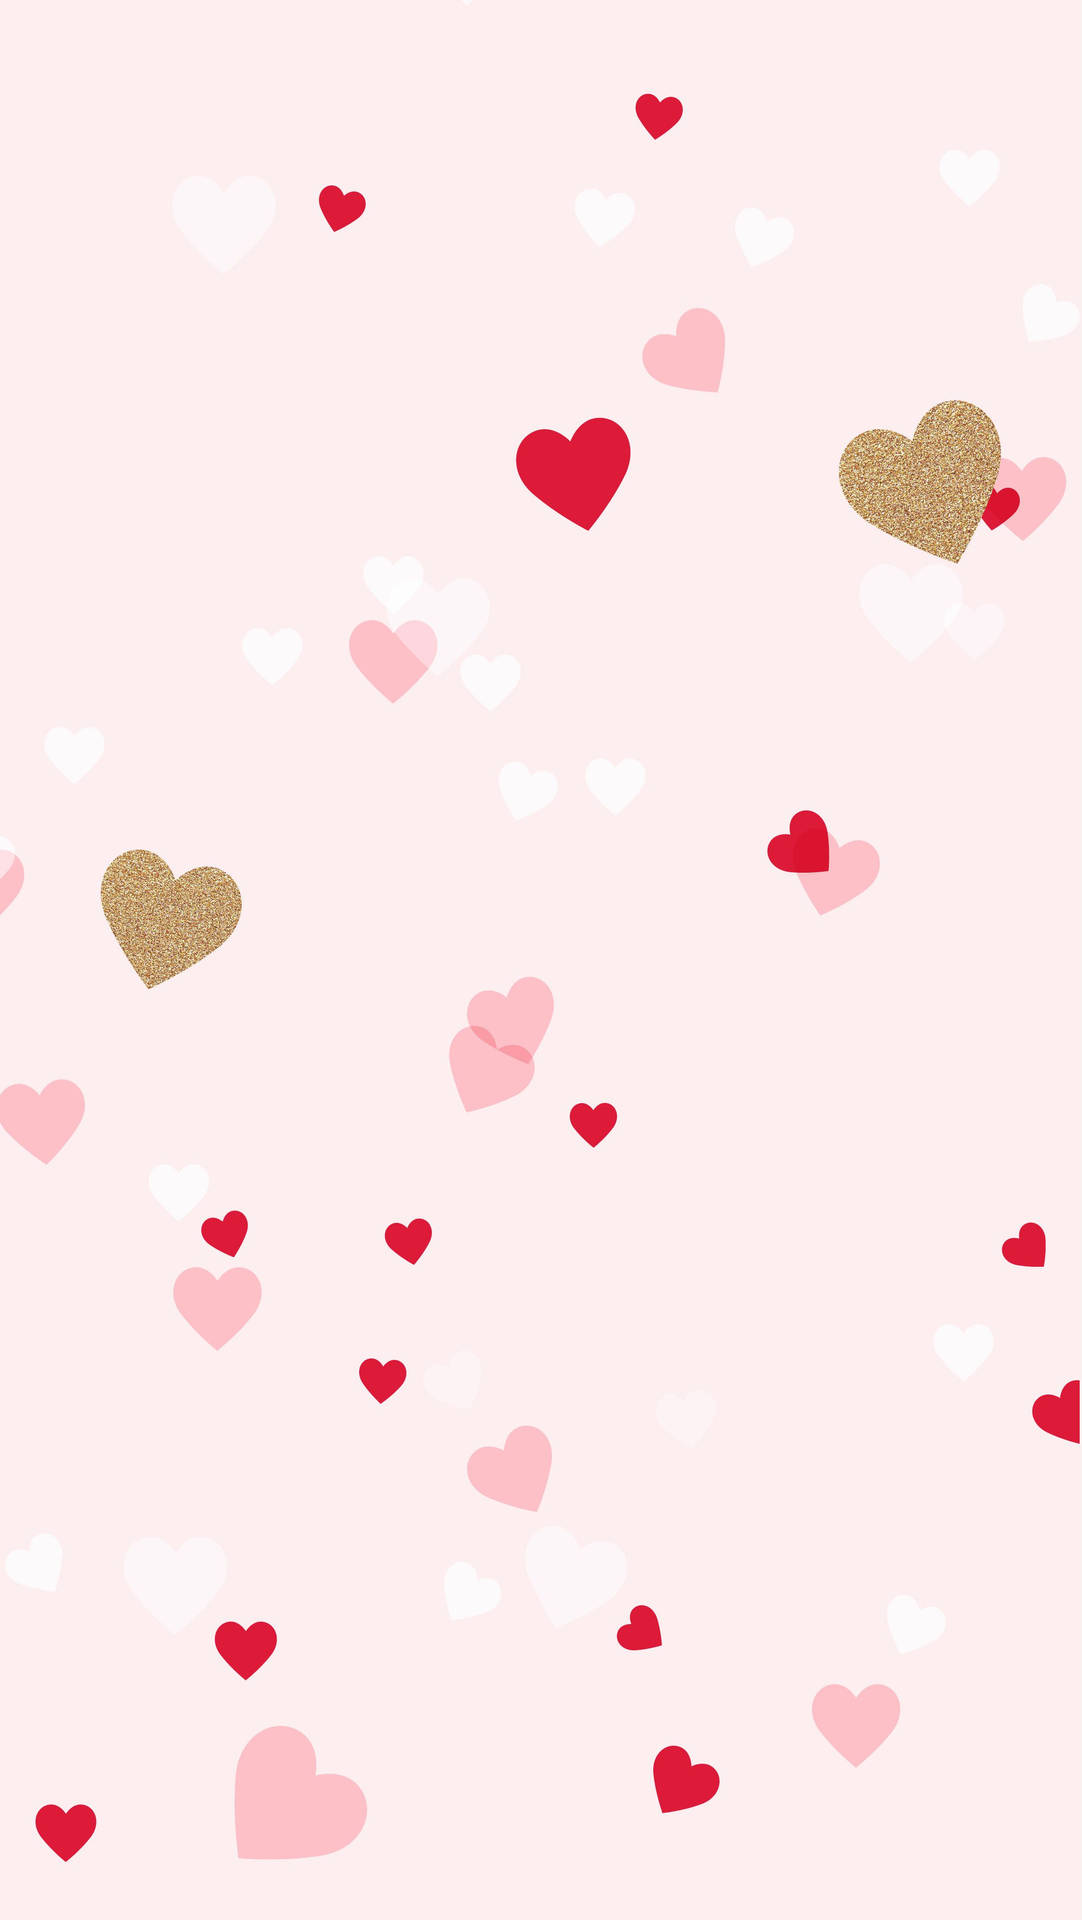 Download Red And Pink Heart For Girl Phone Background Wallpaper | Wallpapers .com